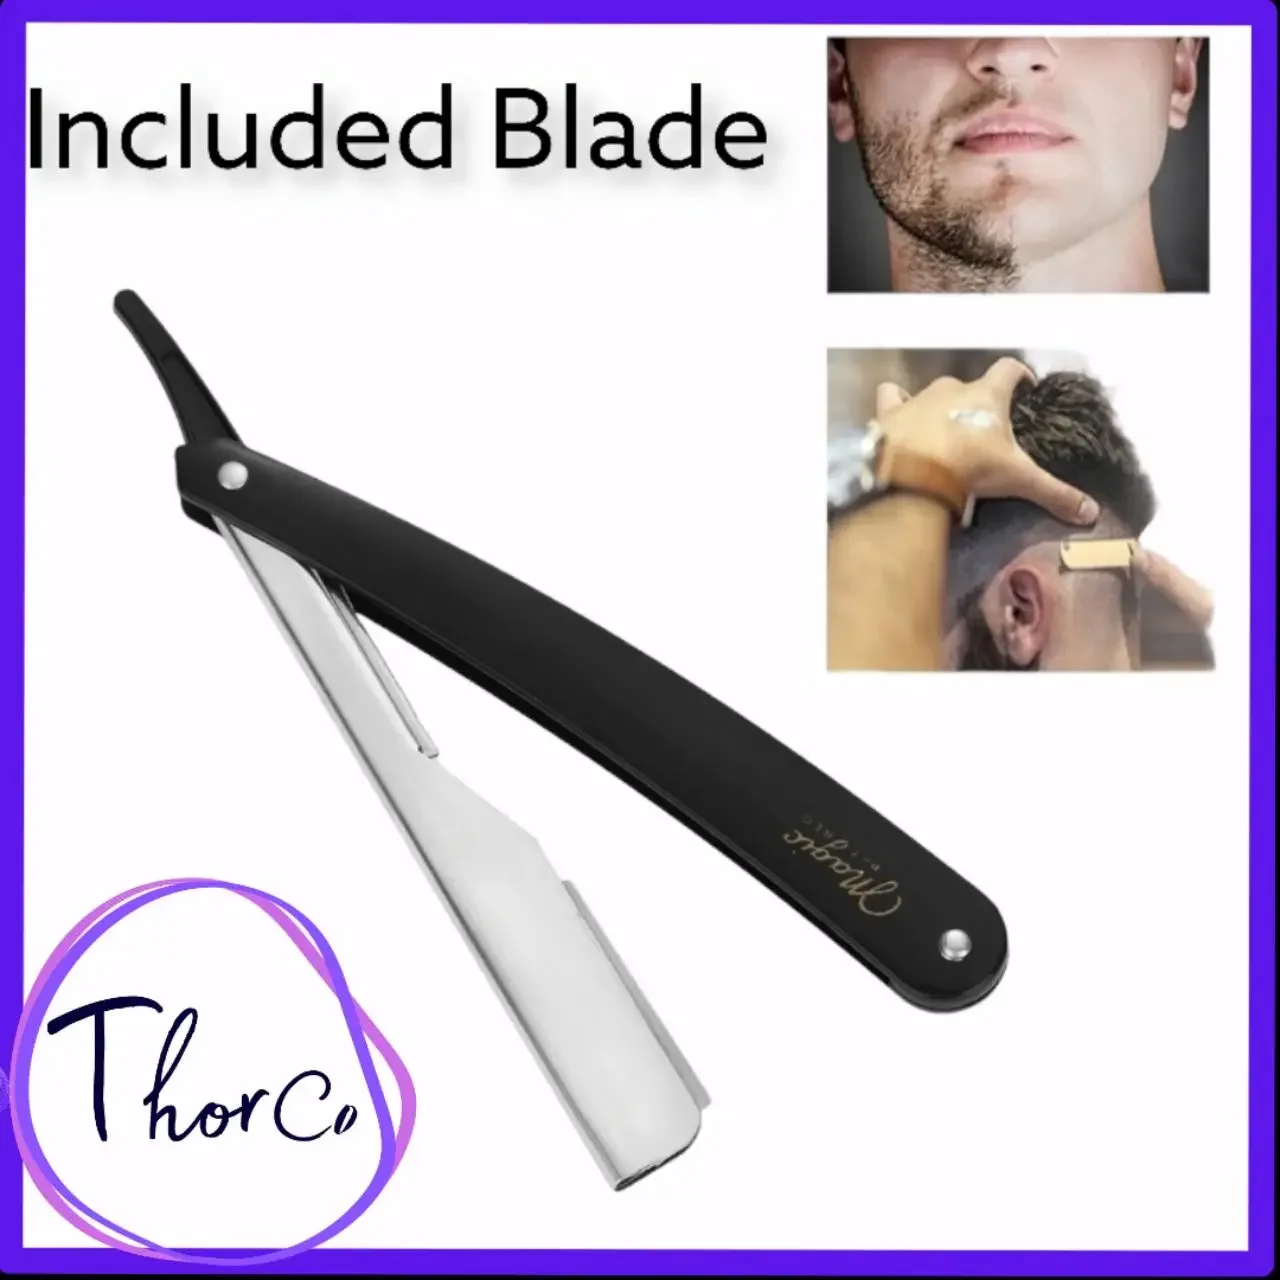 ThorCo Foldable Shaver Come with Blade /Razor Foldable Handle Shaver/ Shaver Face Hair Remover/shaver